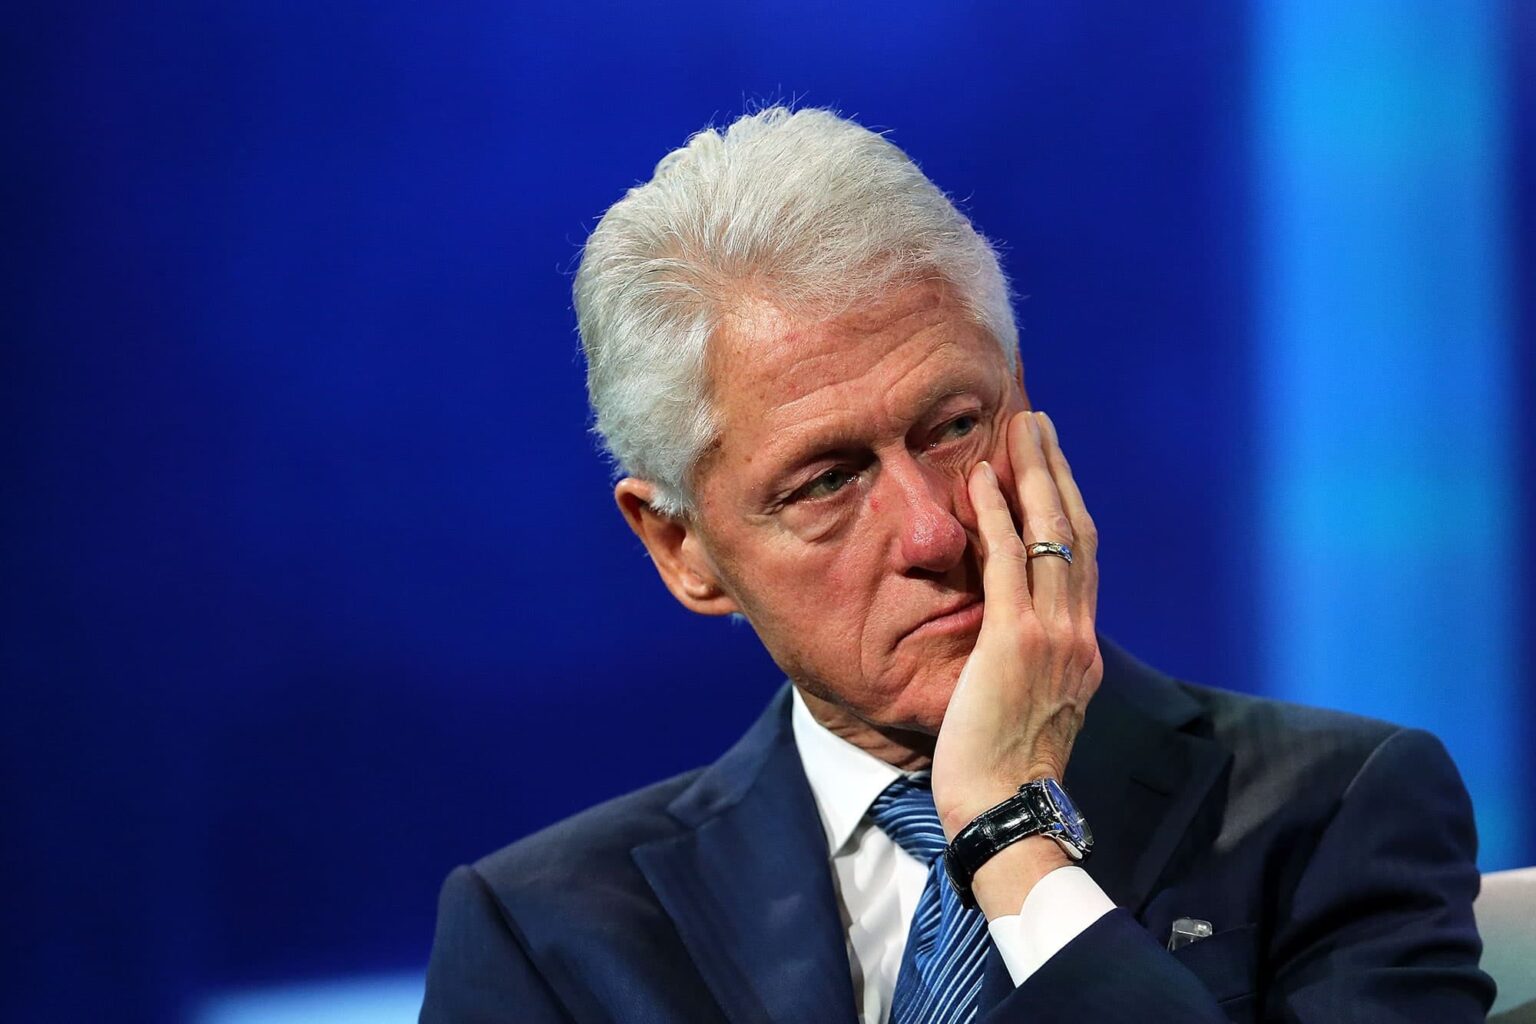 Remember Bill Clinton? No tweets or Reddit threads during his presidency, but there were still plenty of scandals. Learn all about the new tell-all memoir!